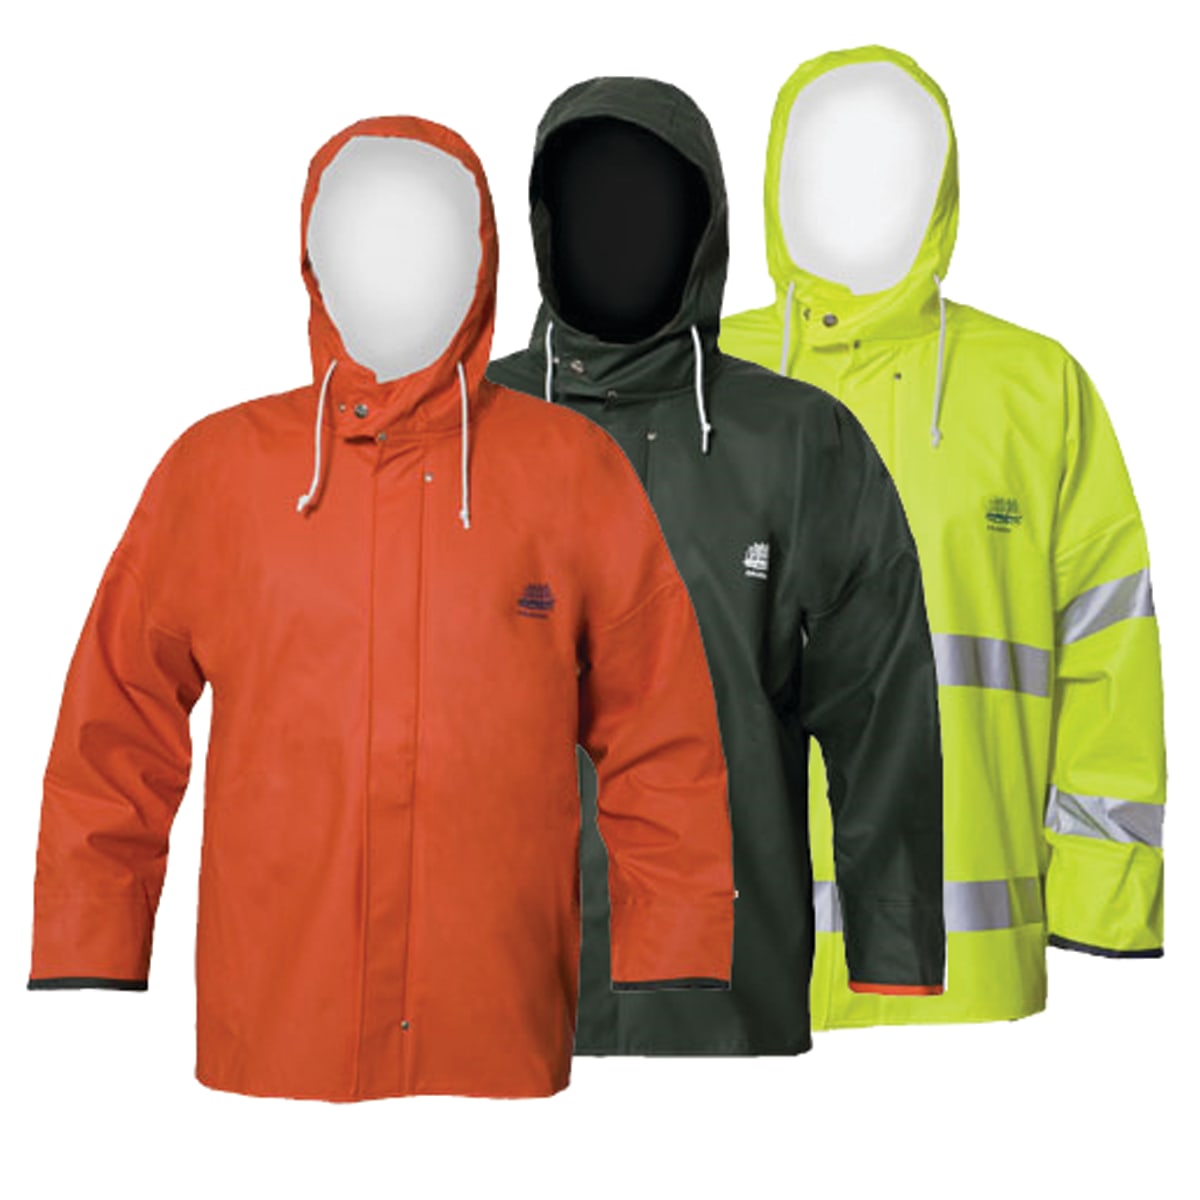 Commercial Foul Weather Gear